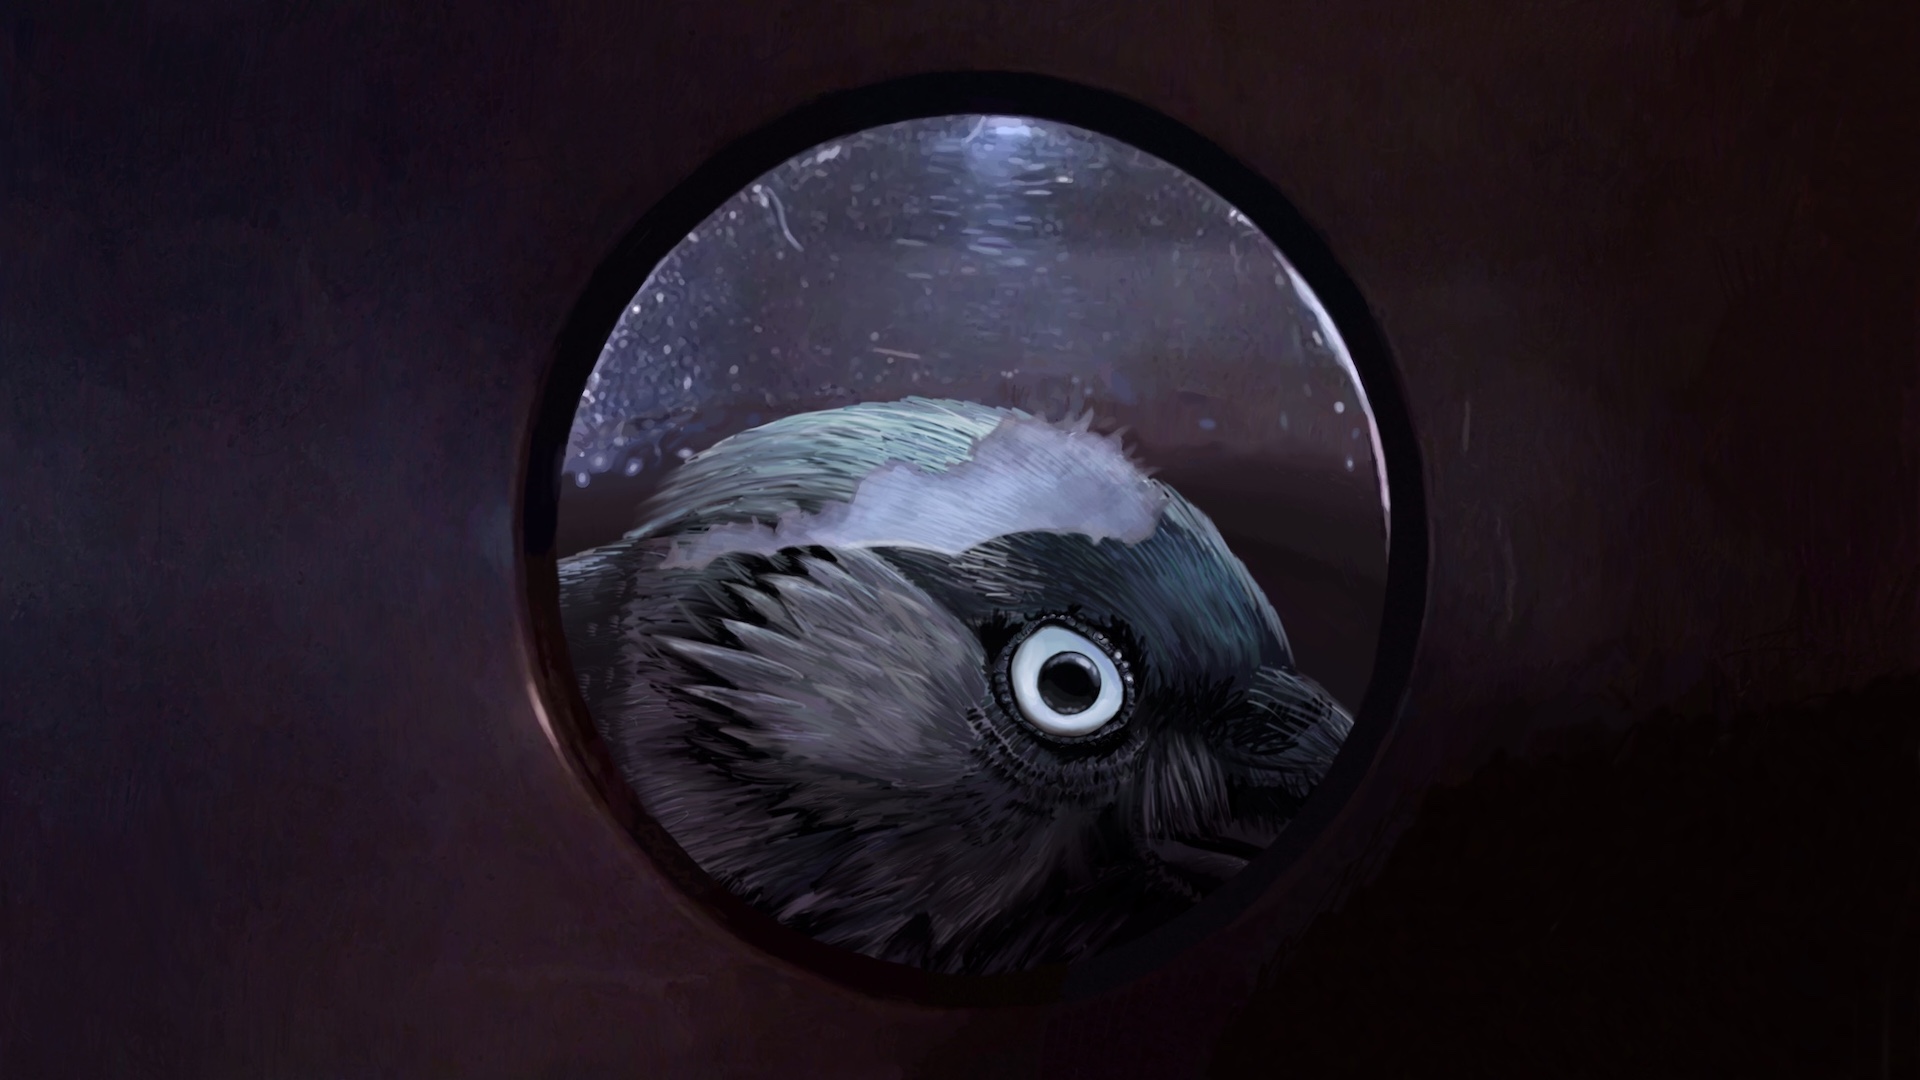 Digitally painted reproduction of of a frame from Jurassic Park, but instead of a velociraptor peeking through the kitchen window, it's  a giant jackdaw.